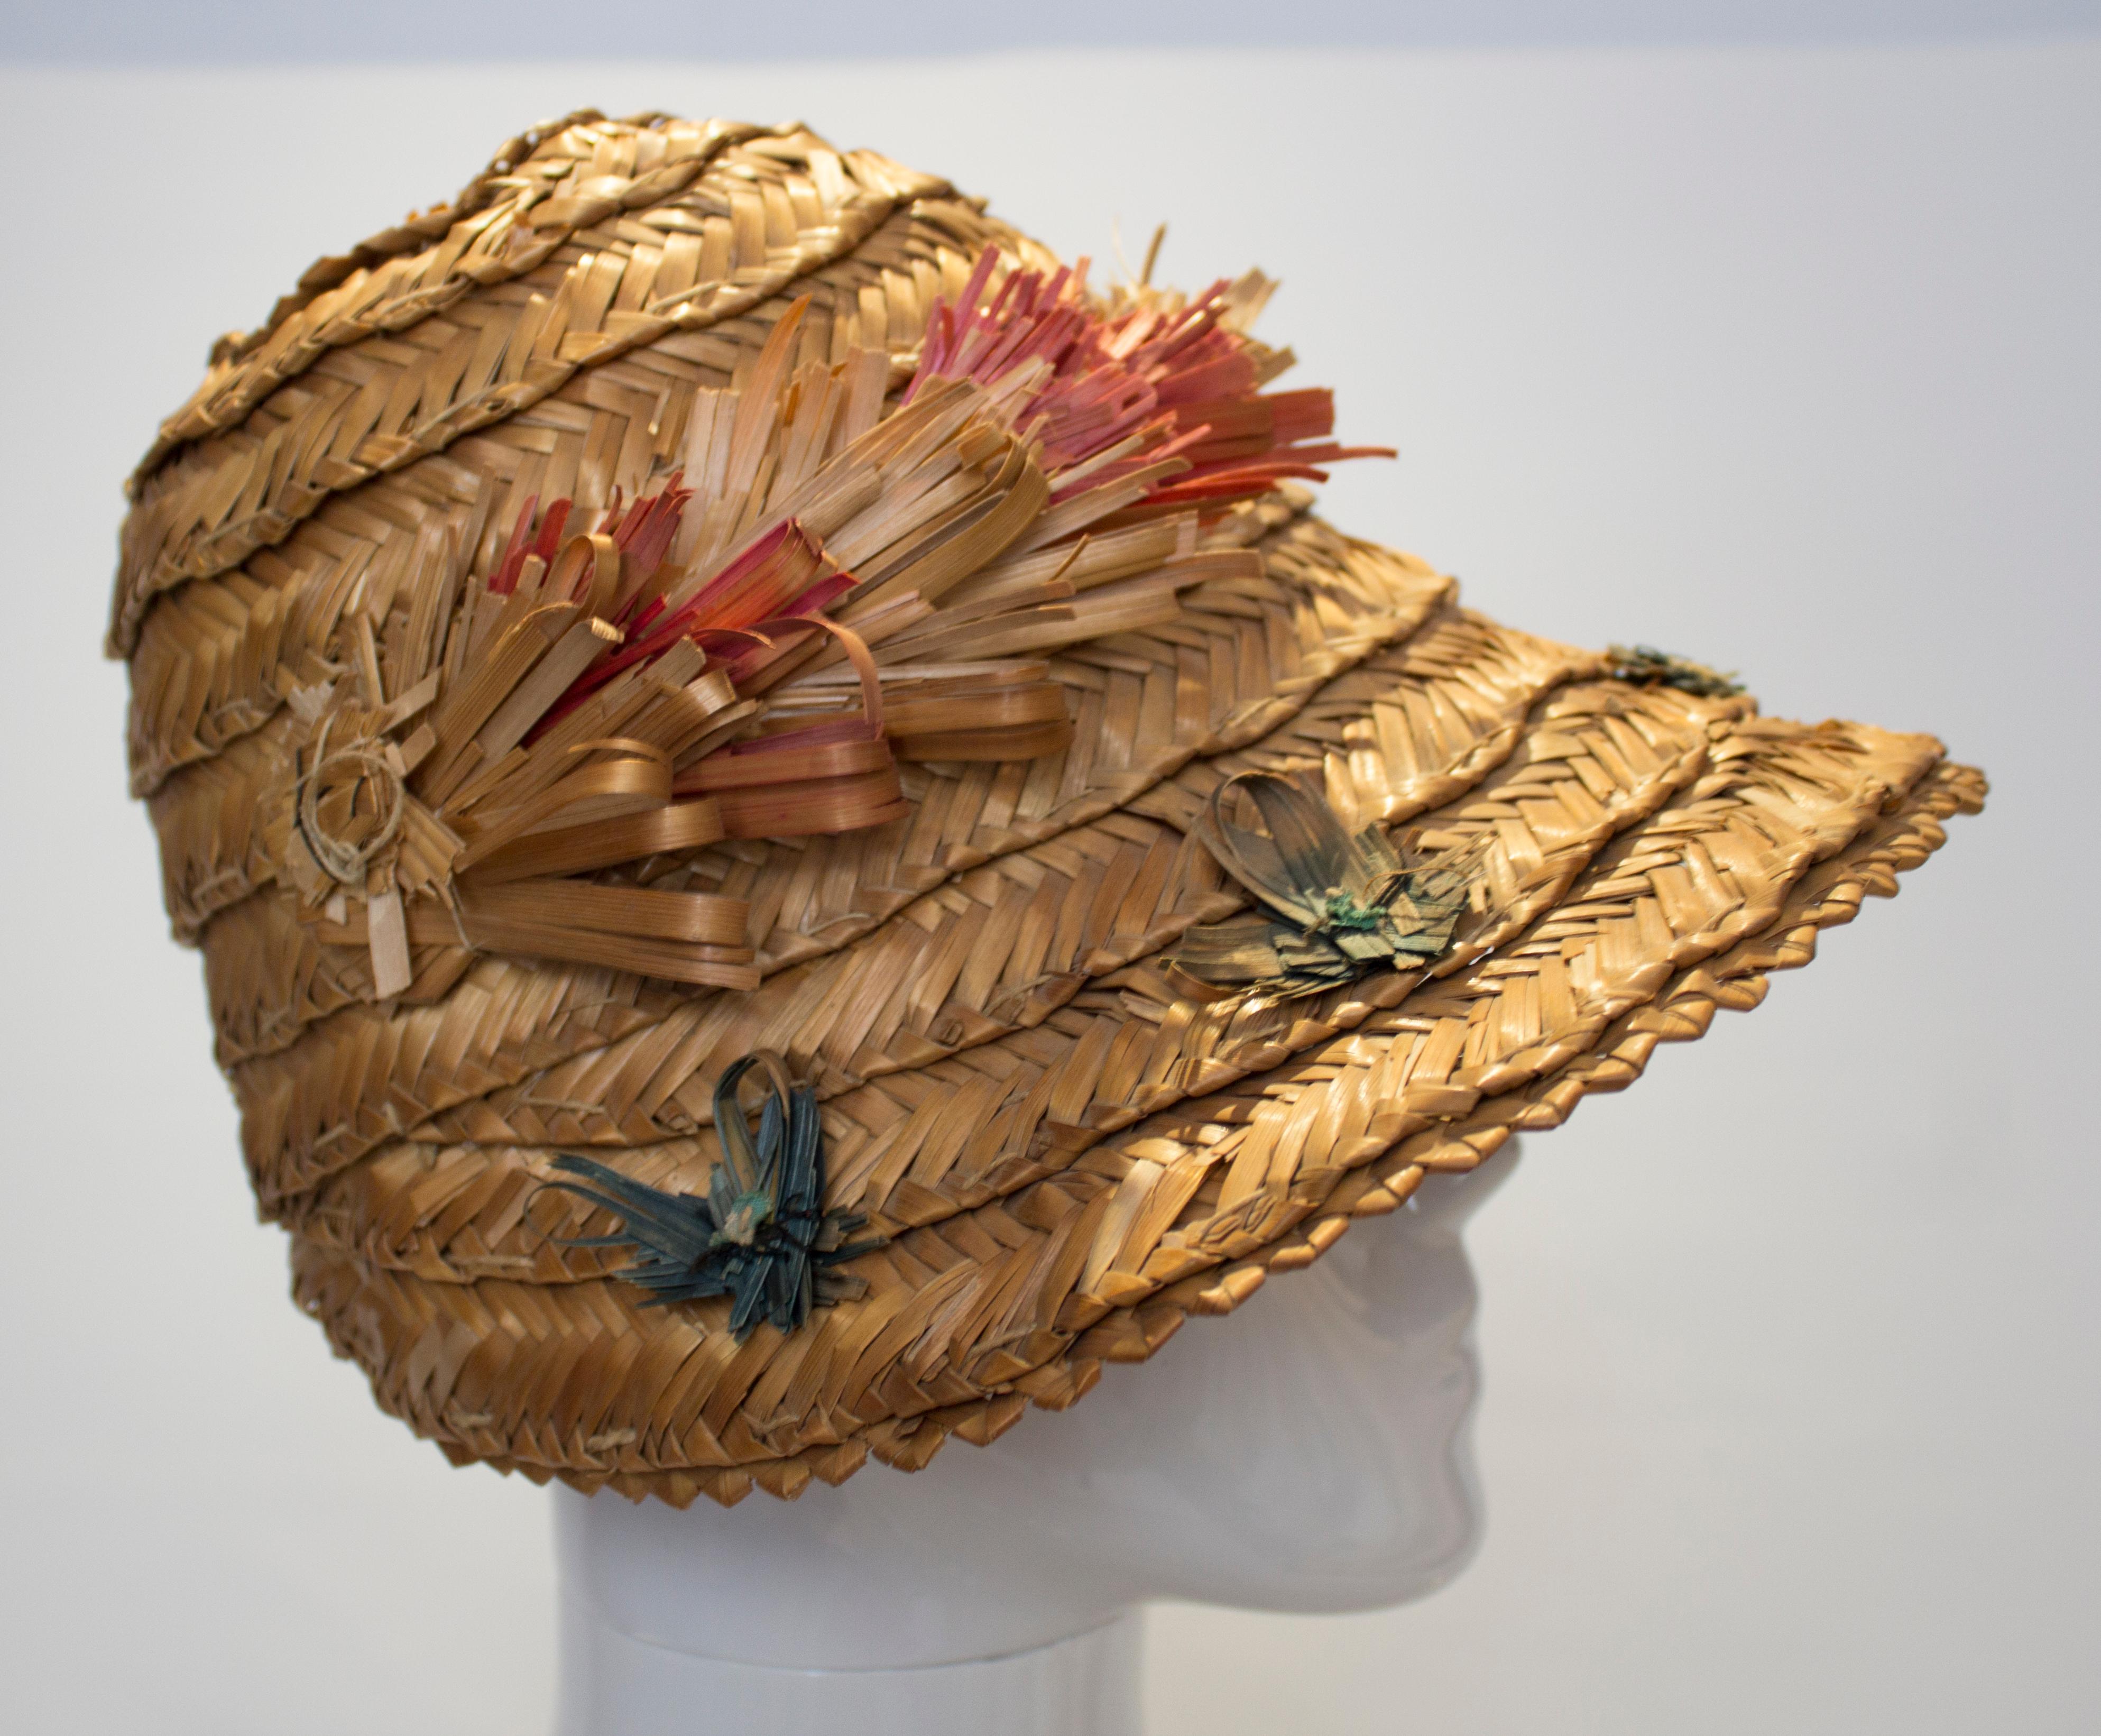  A fun vintage hat for Summer. The hat has a wonderful shape with a subtle peak. In a natural colour it has a band of fringed straw as decoration.Measurements: internal circumference 22'', height 6 1/2''.